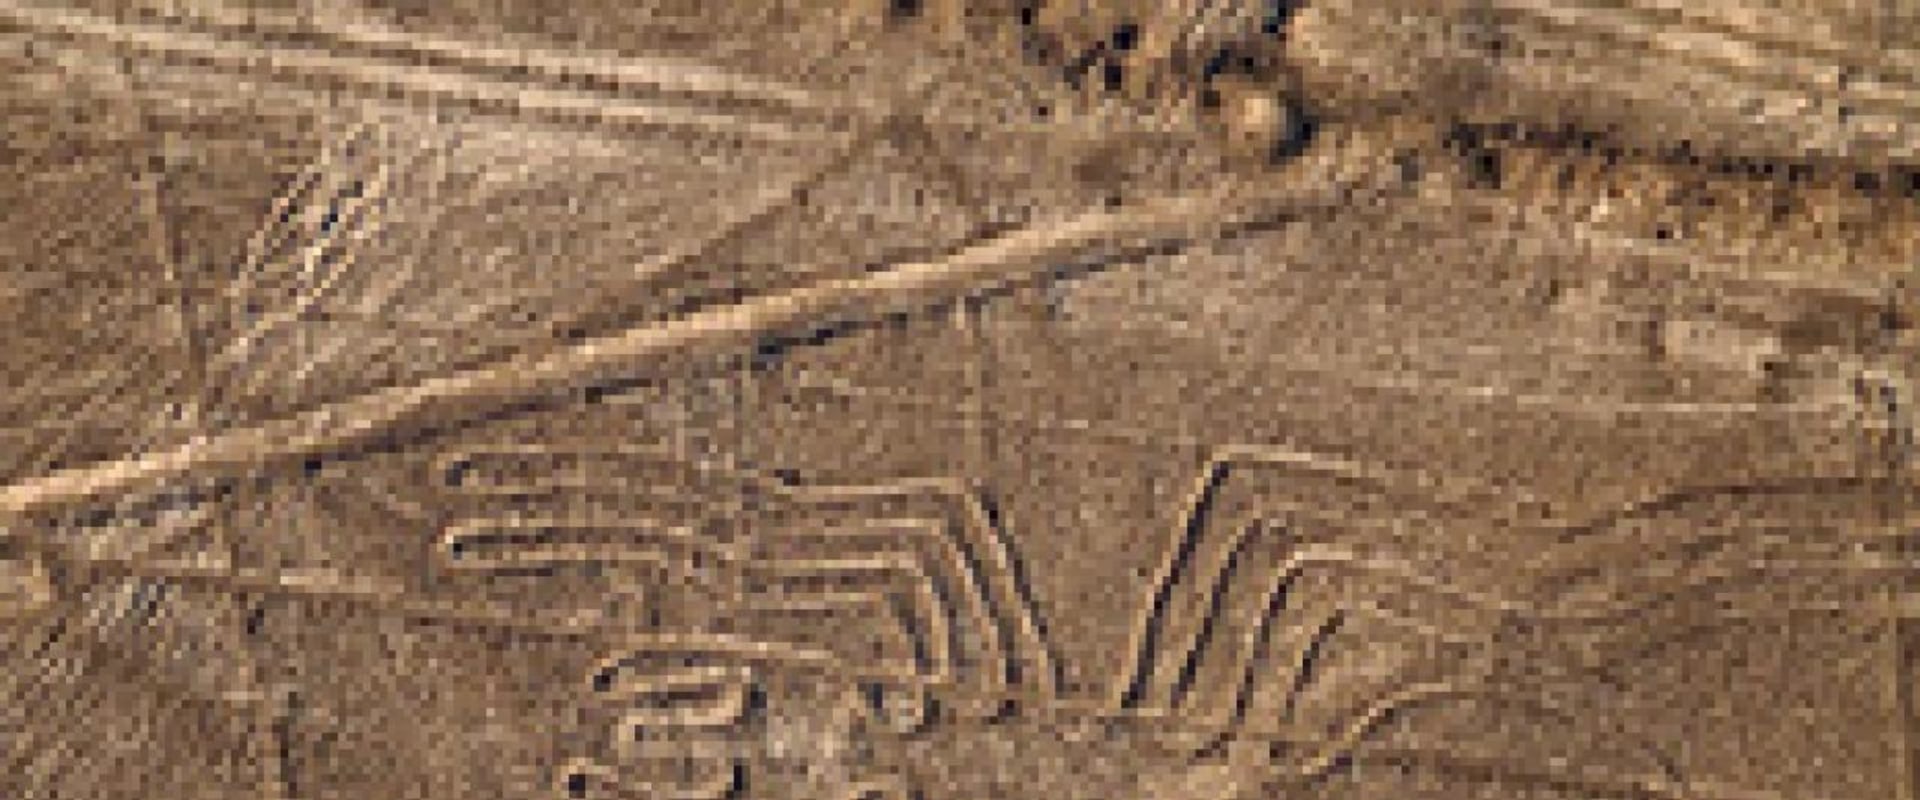 Sightings and Encounters with Aliens near the Nazca Lines